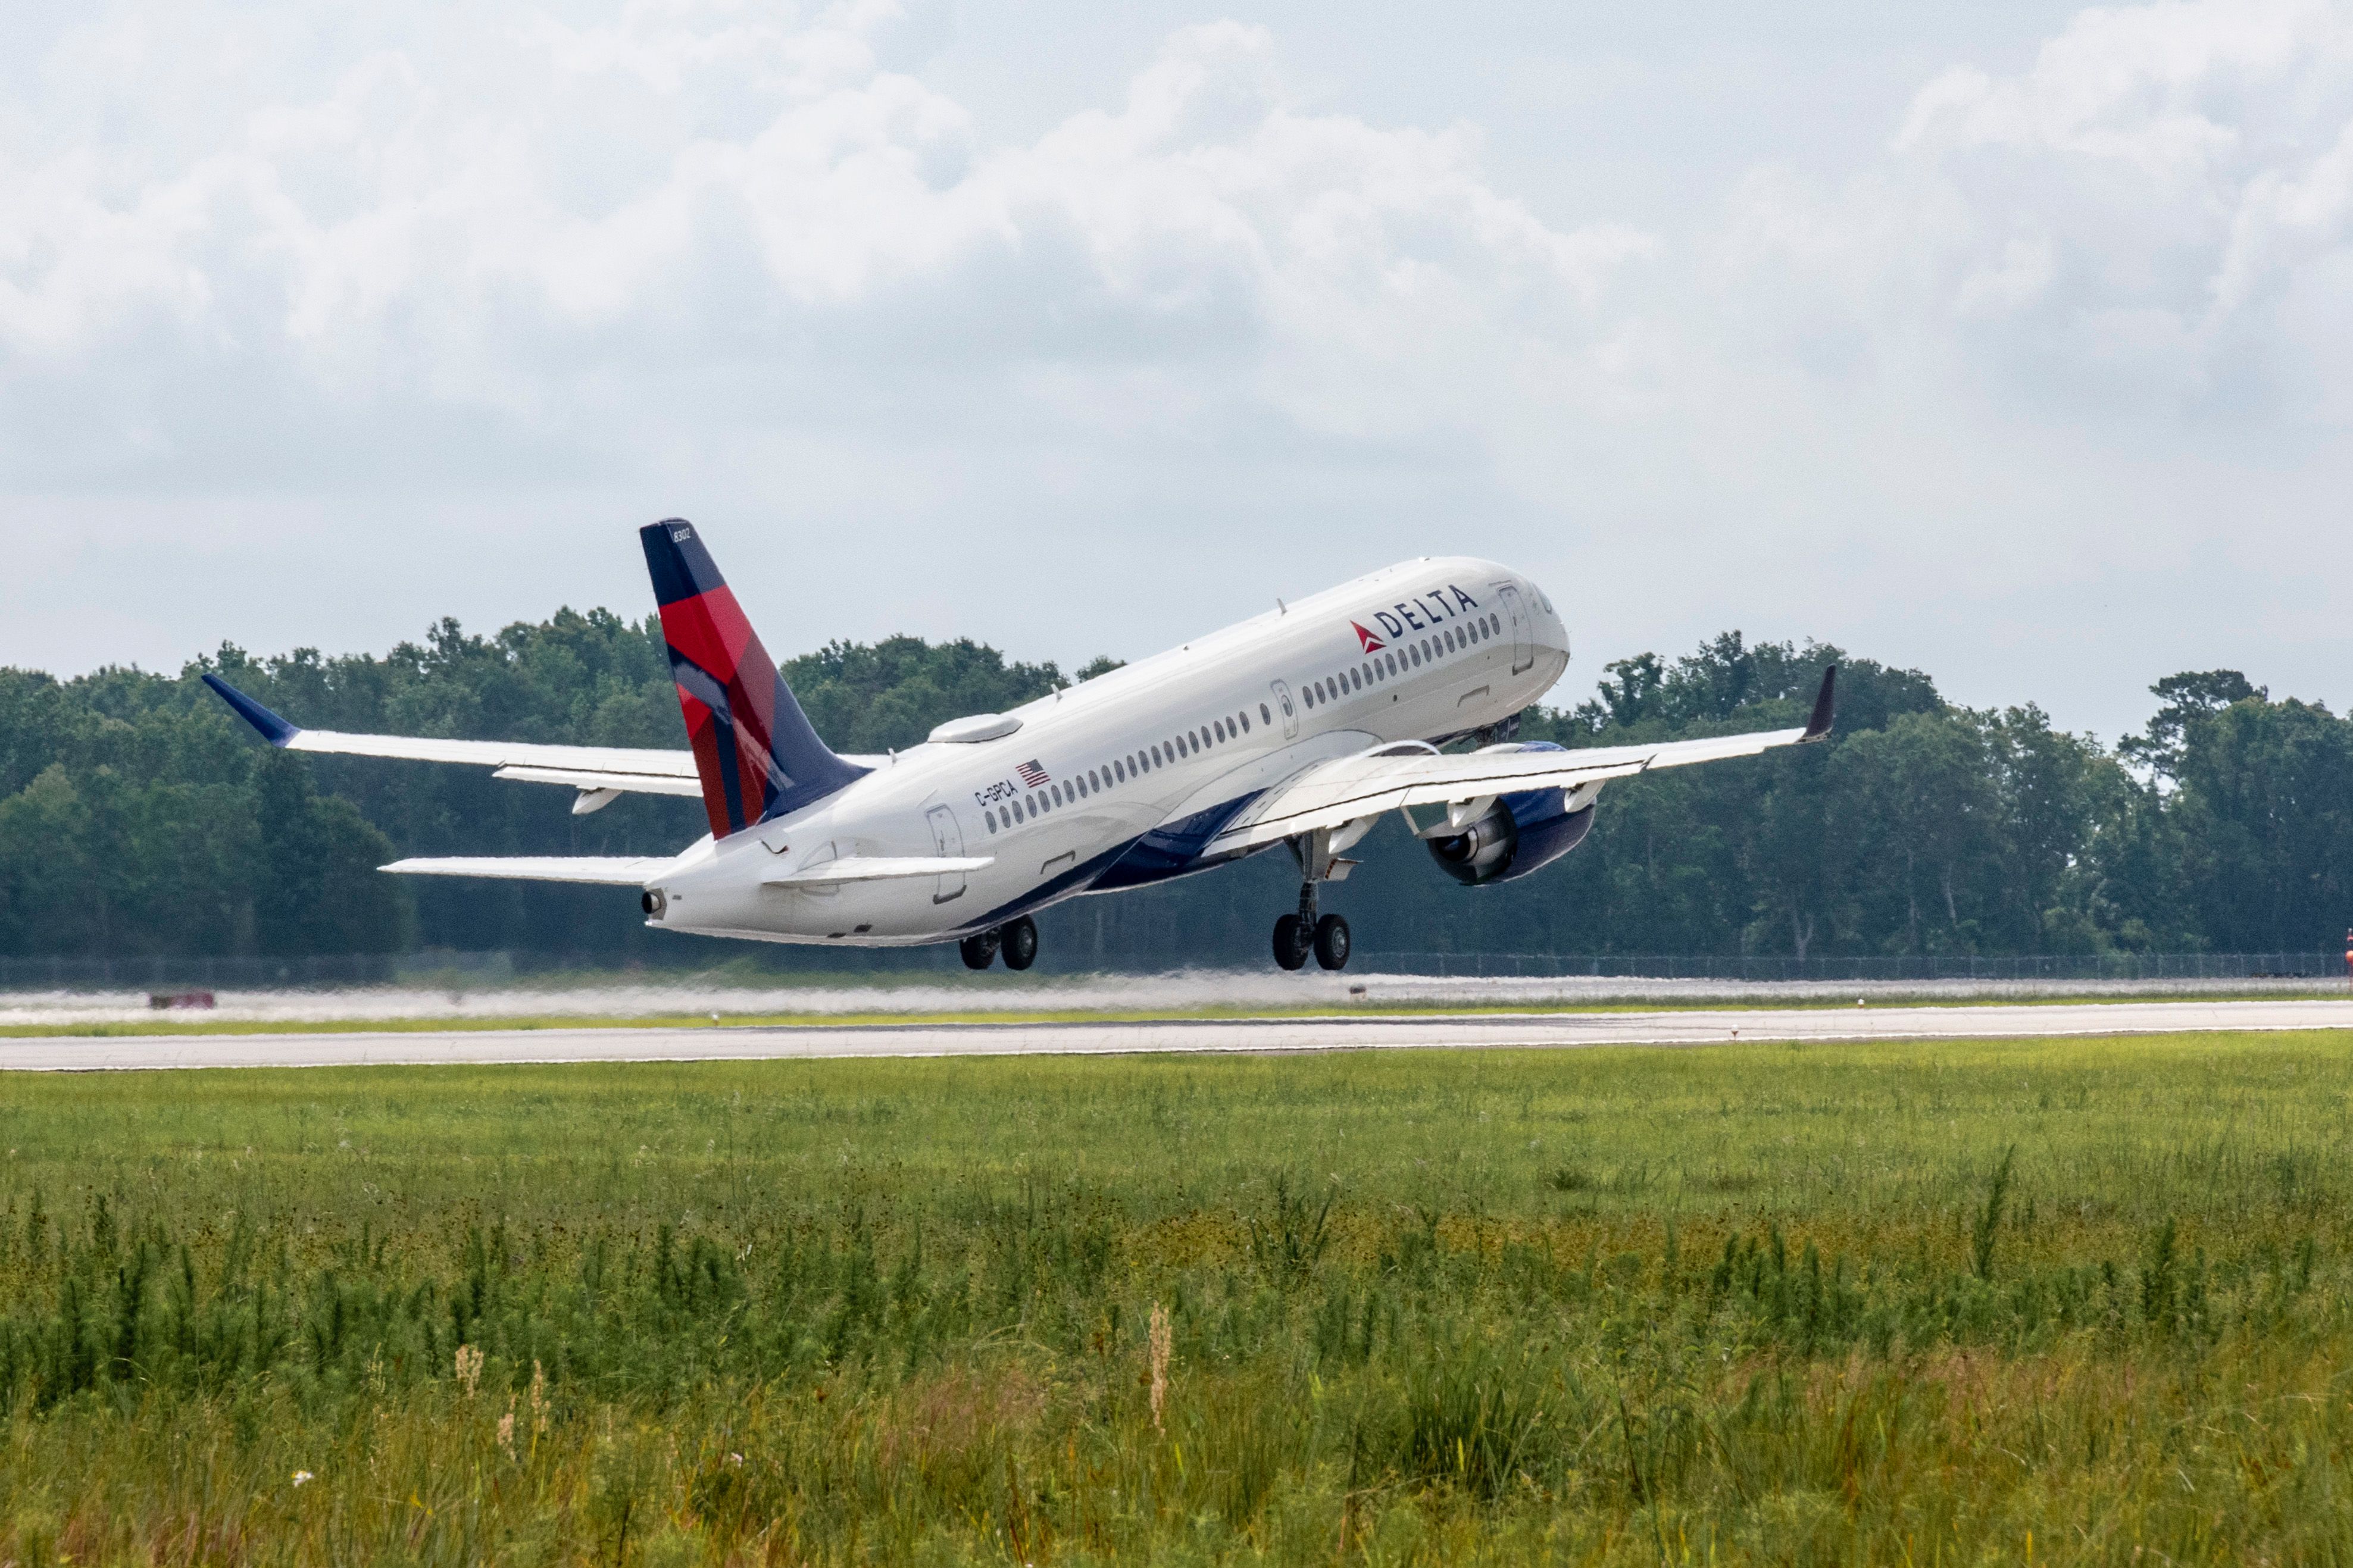 A Delta Air Lines Airbus A220 Taking off.